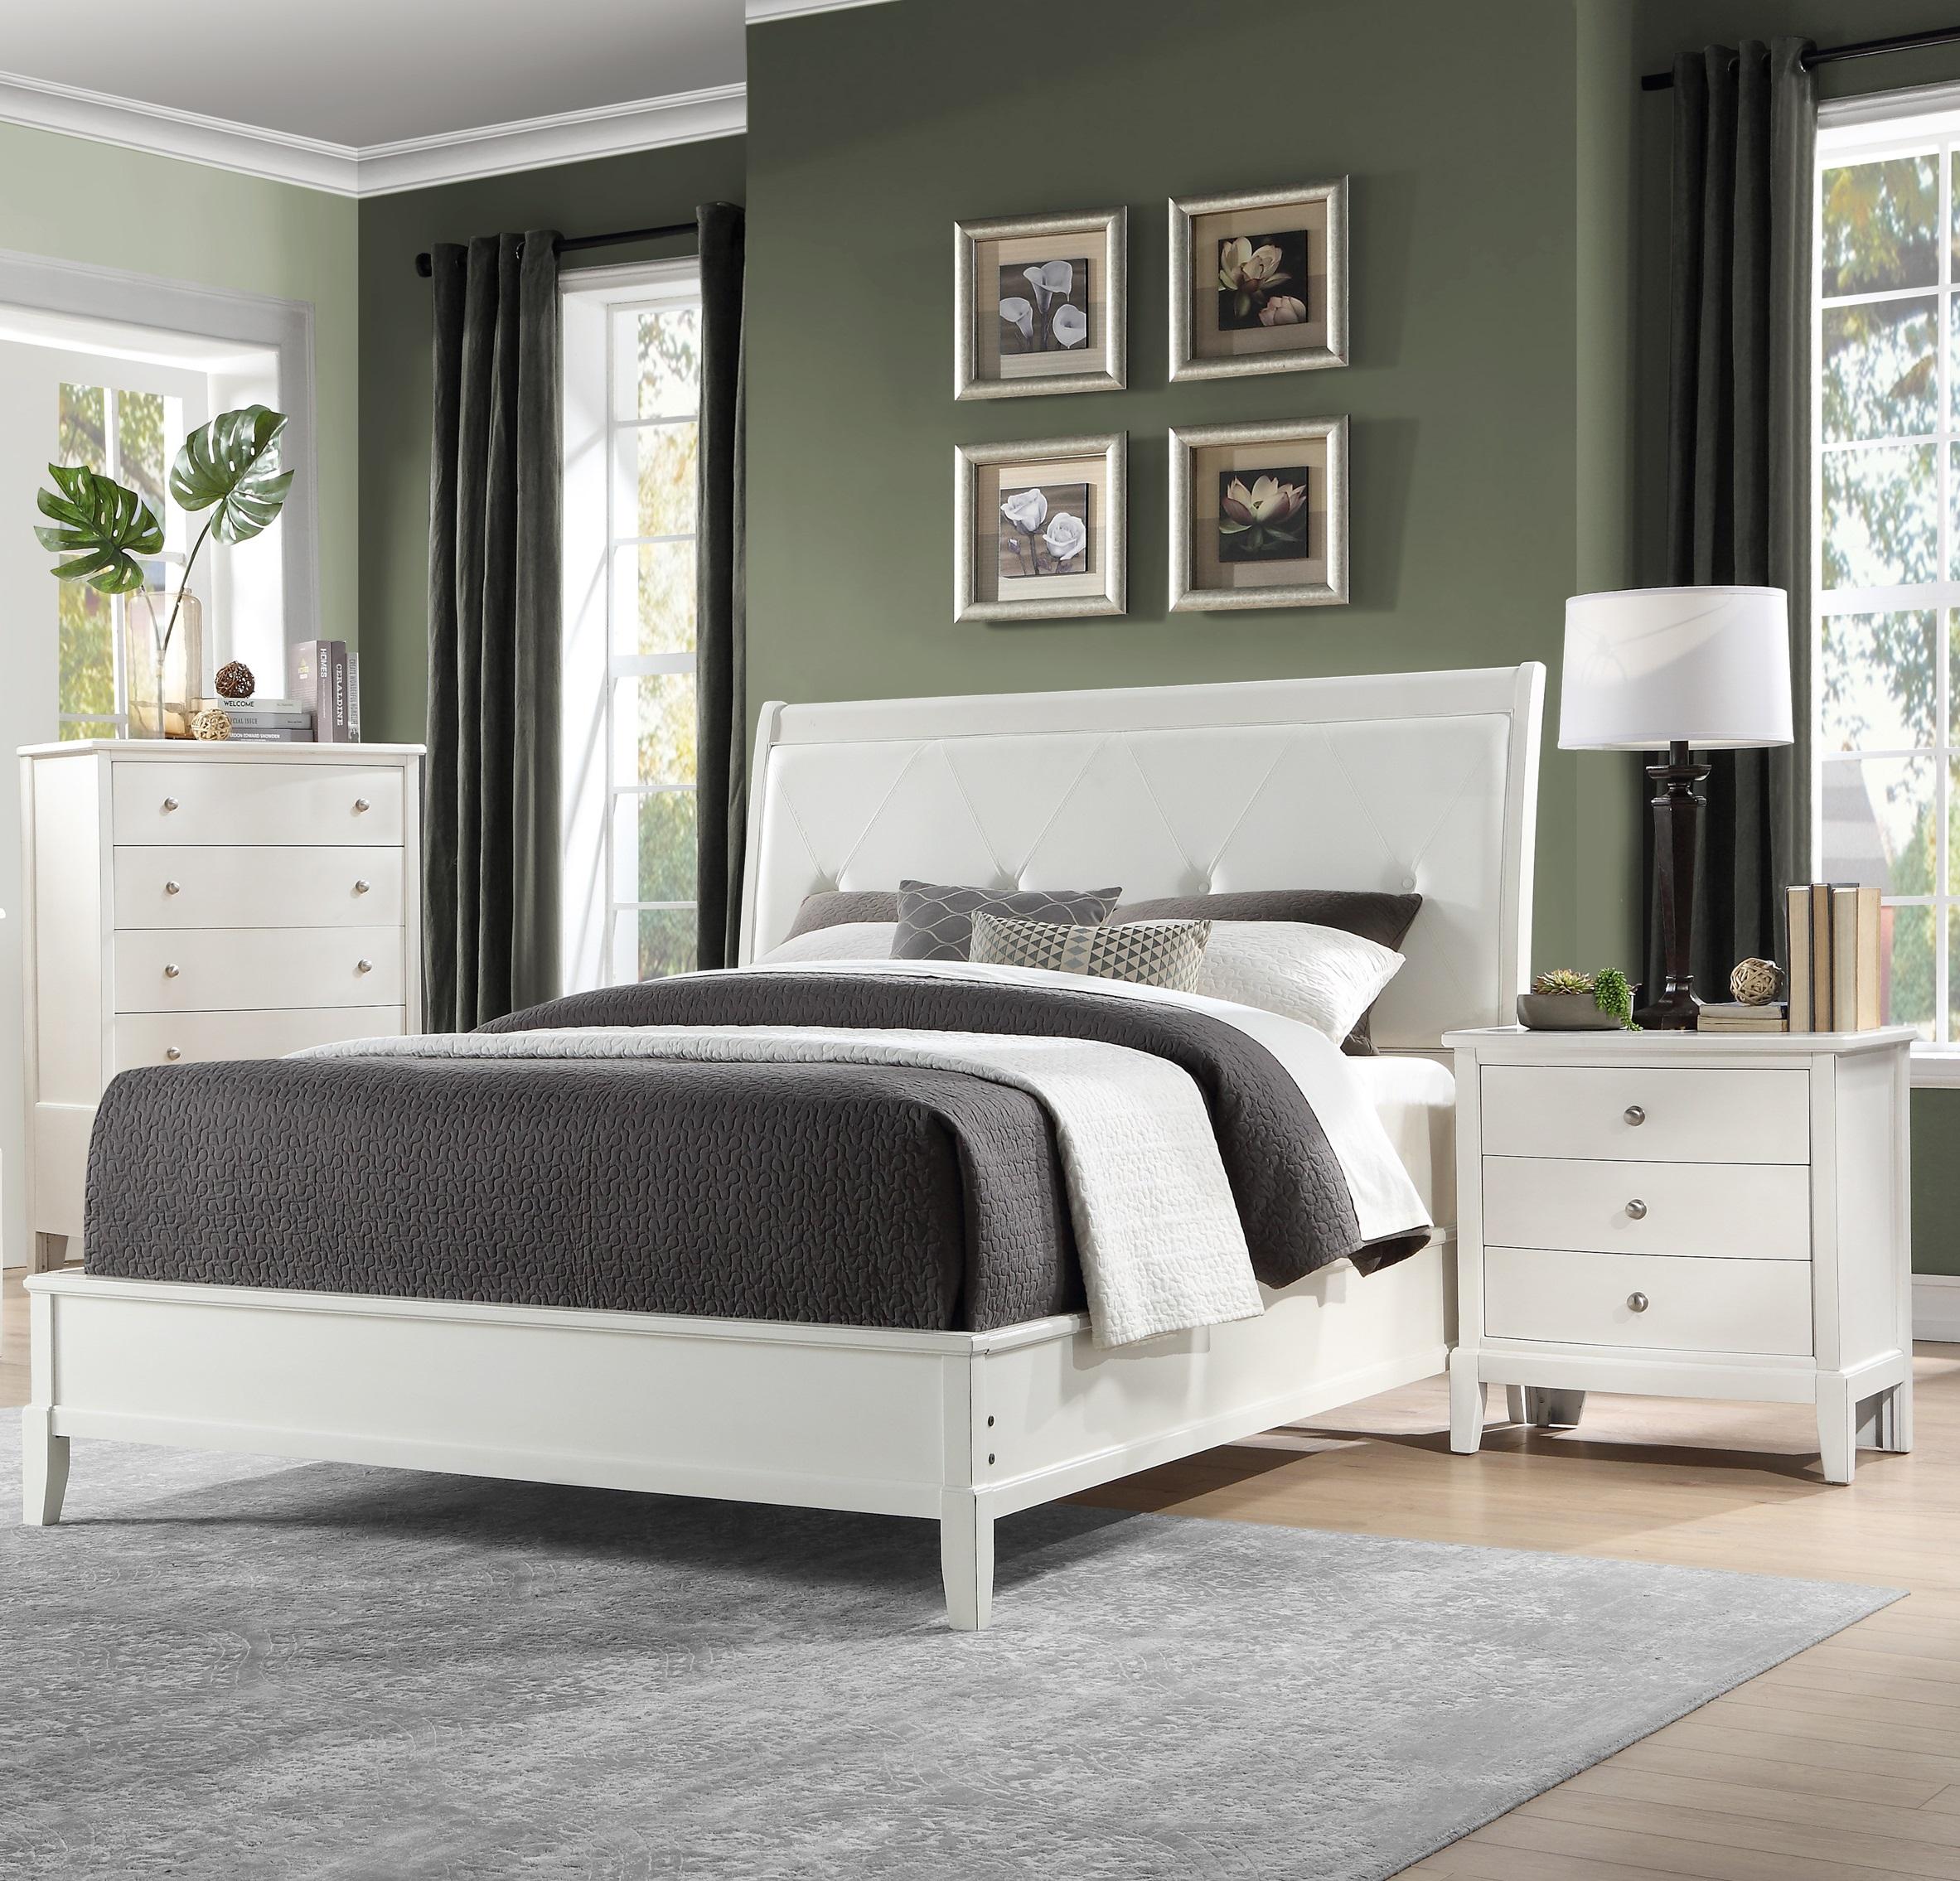 Transitional Bedroom Set 1730WW-1-3PC Cotterill 1730WW-1-3PC in Antique White Faux Leather